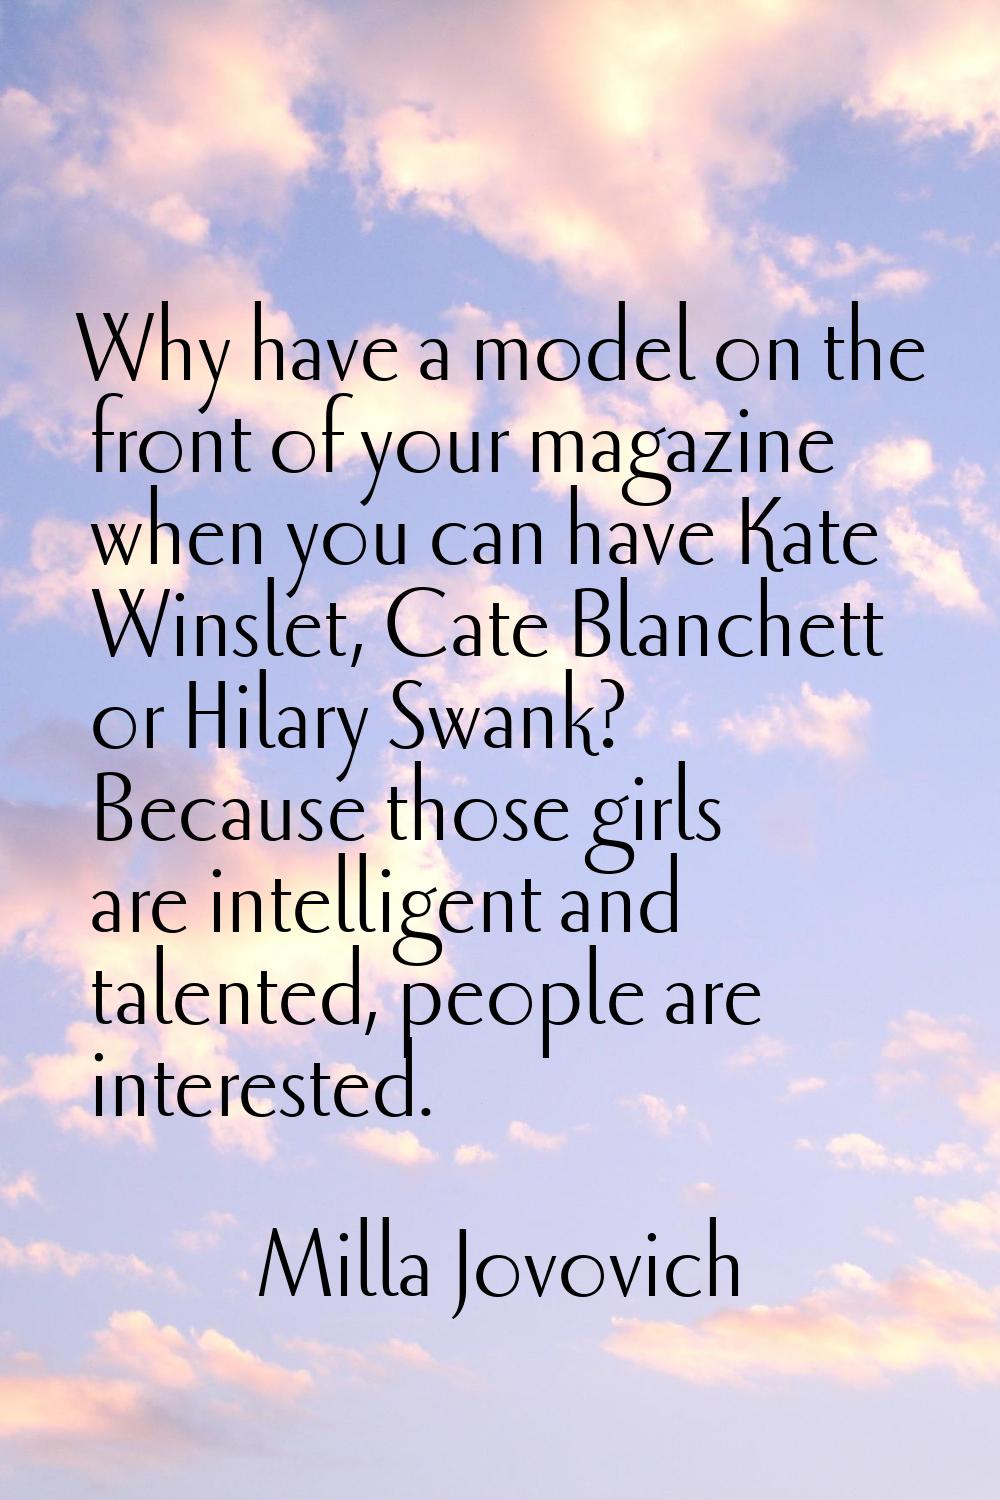 Why have a model on the front of your magazine when you can have Kate Winslet, Cate Blanchett or Hi